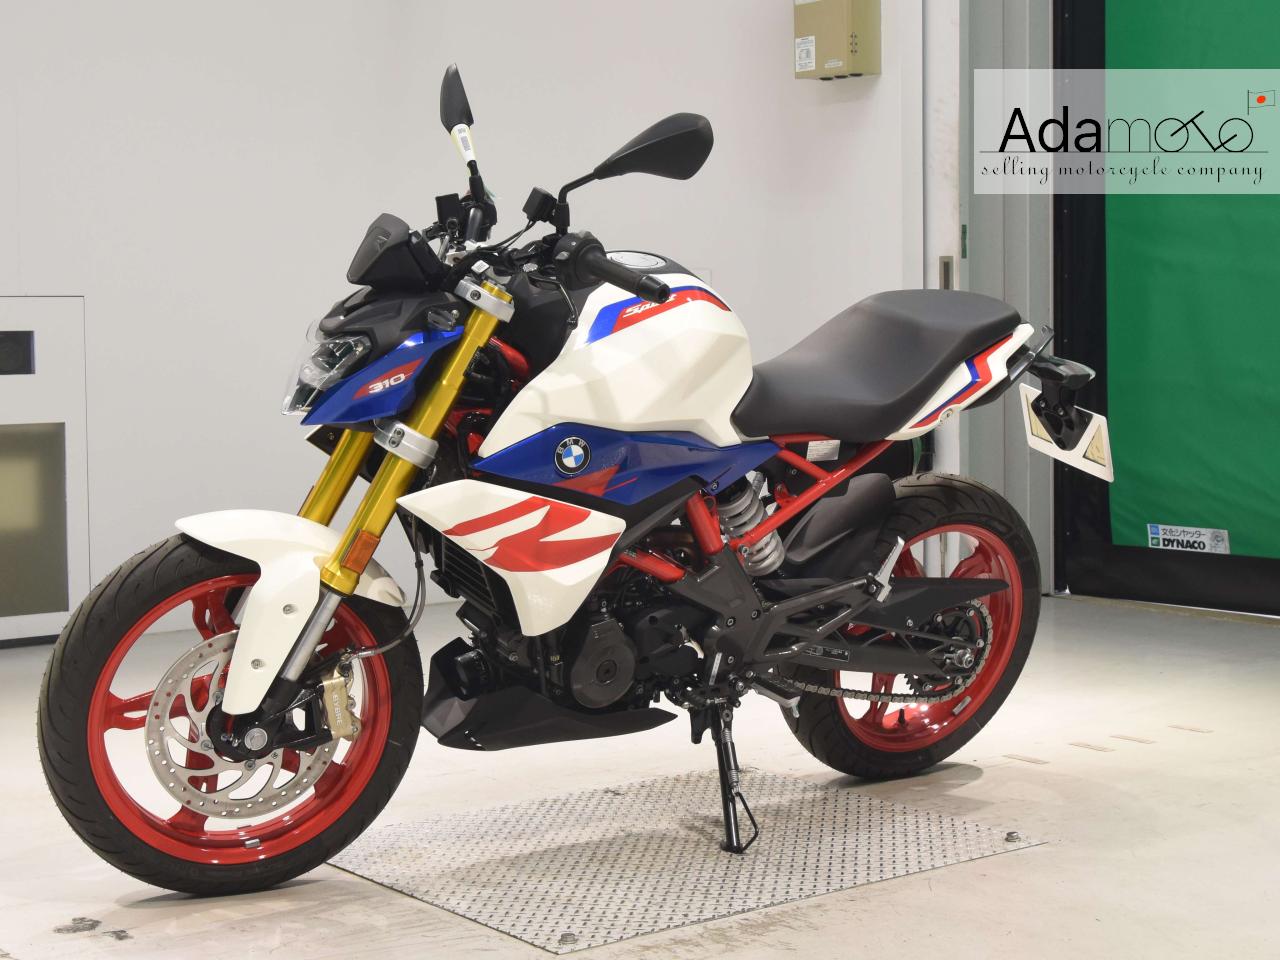 BMW G310R - Adamoto - Motorcycles from Japan